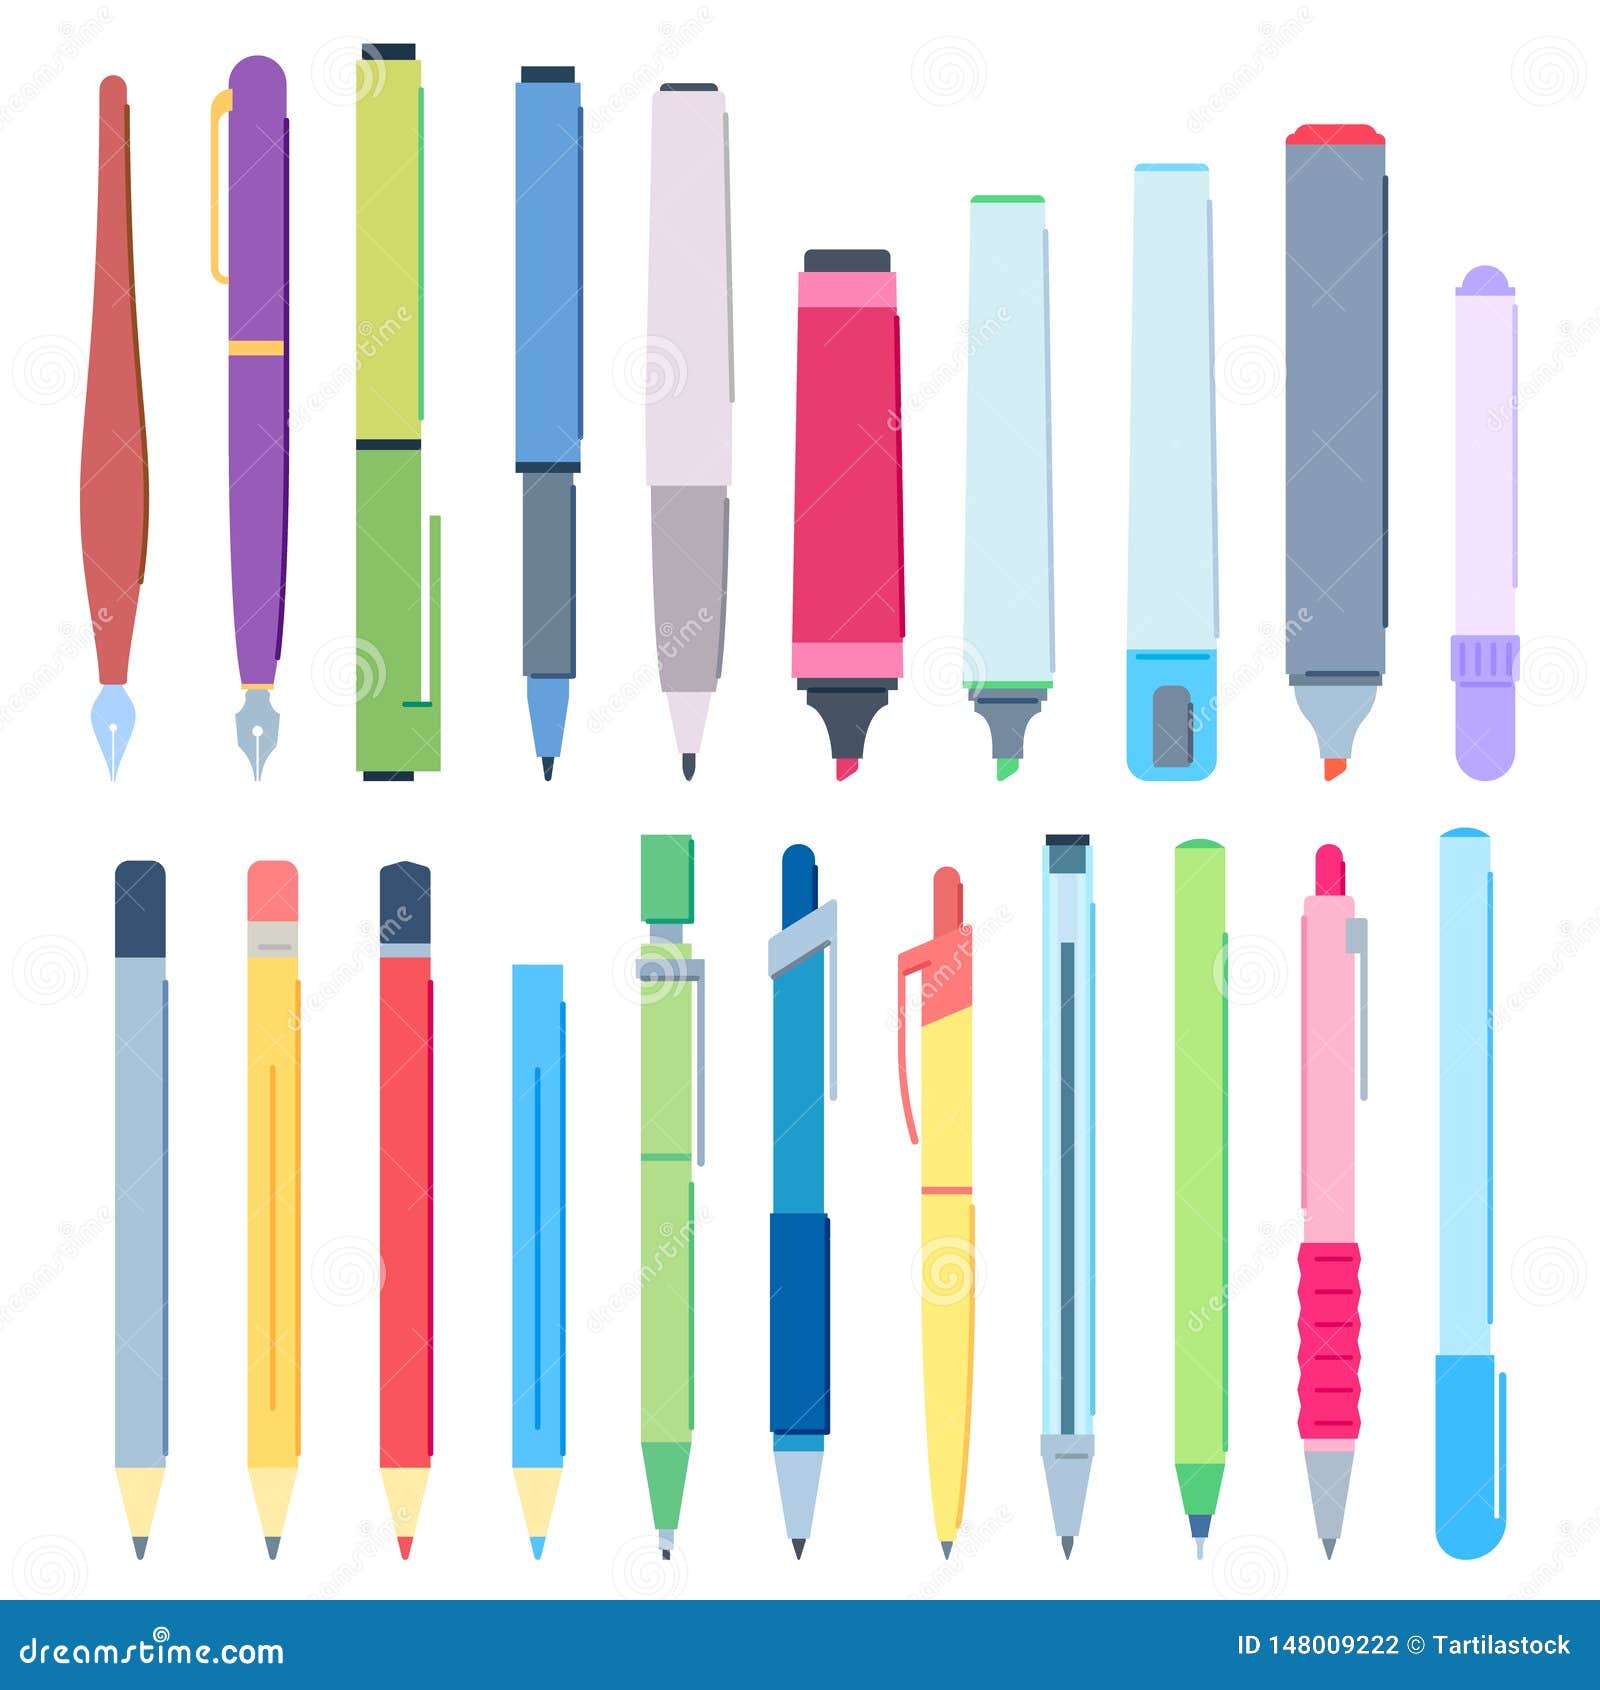 cartoon pens and pencils. writing pen, drawing pencil and highlighter marker   set